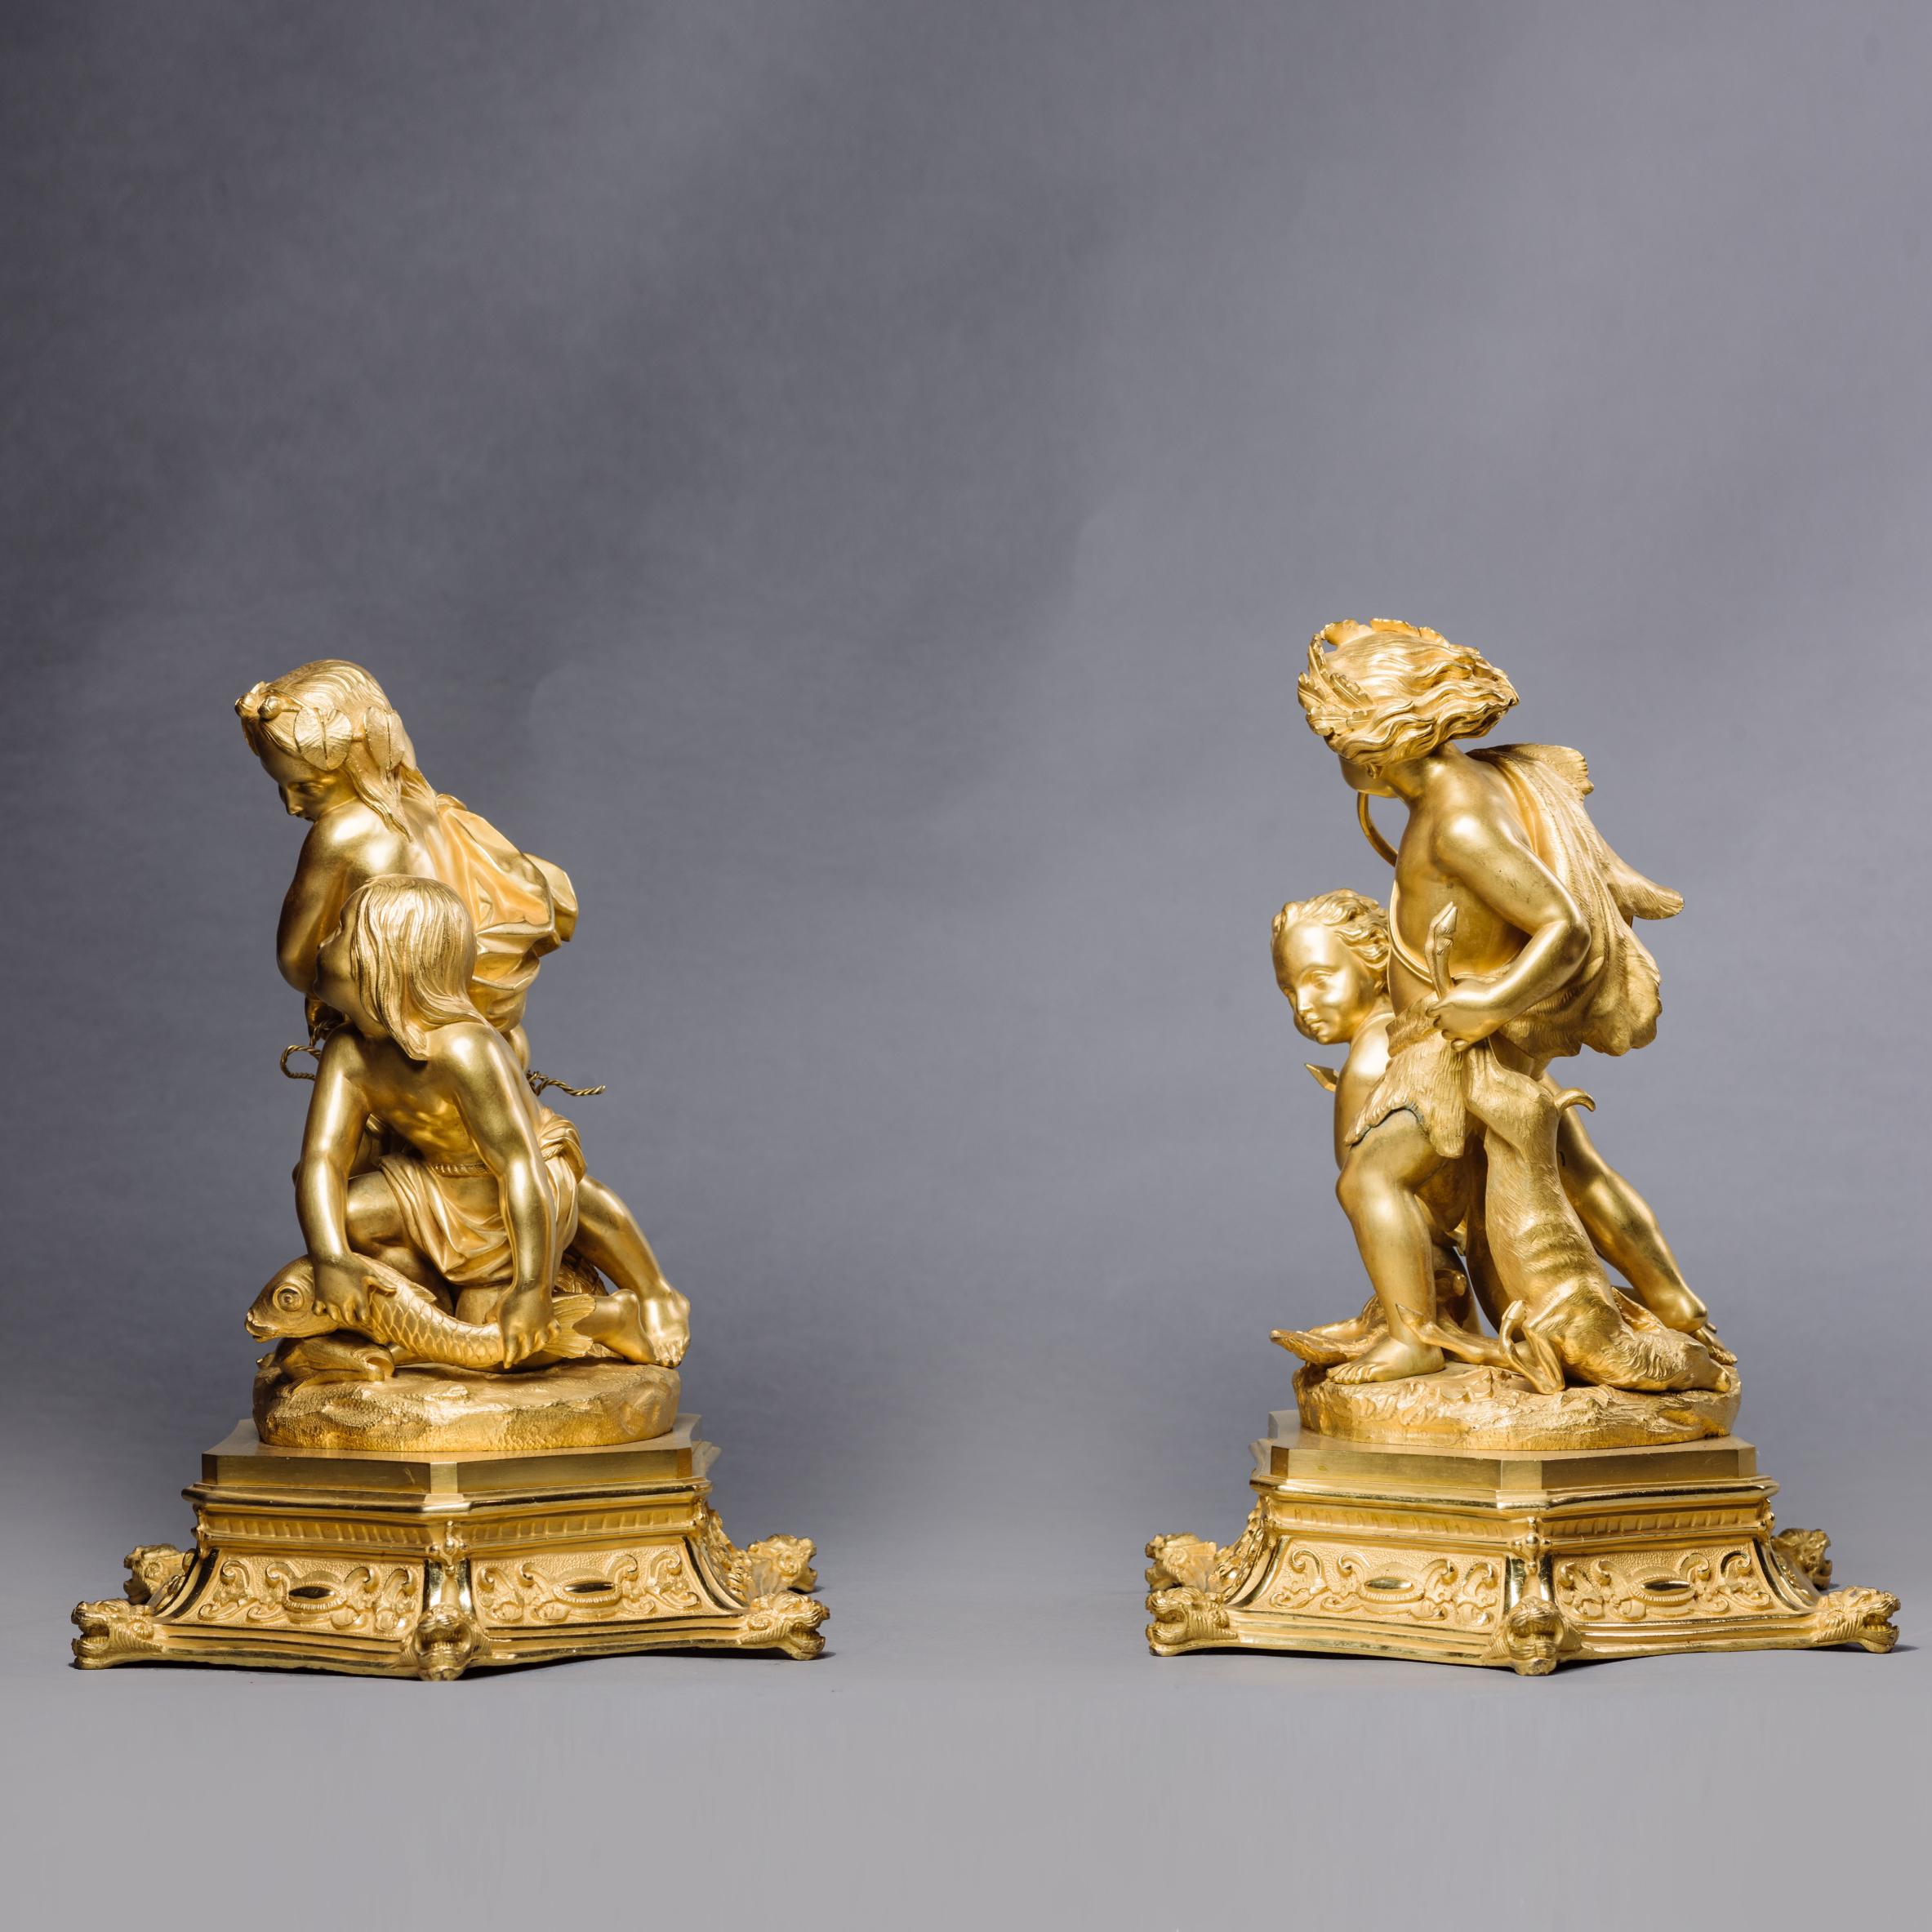 Napoleon III Pair of Restoration Period Gilt-Bronze Figural Groups. French, circa 1830 For Sale